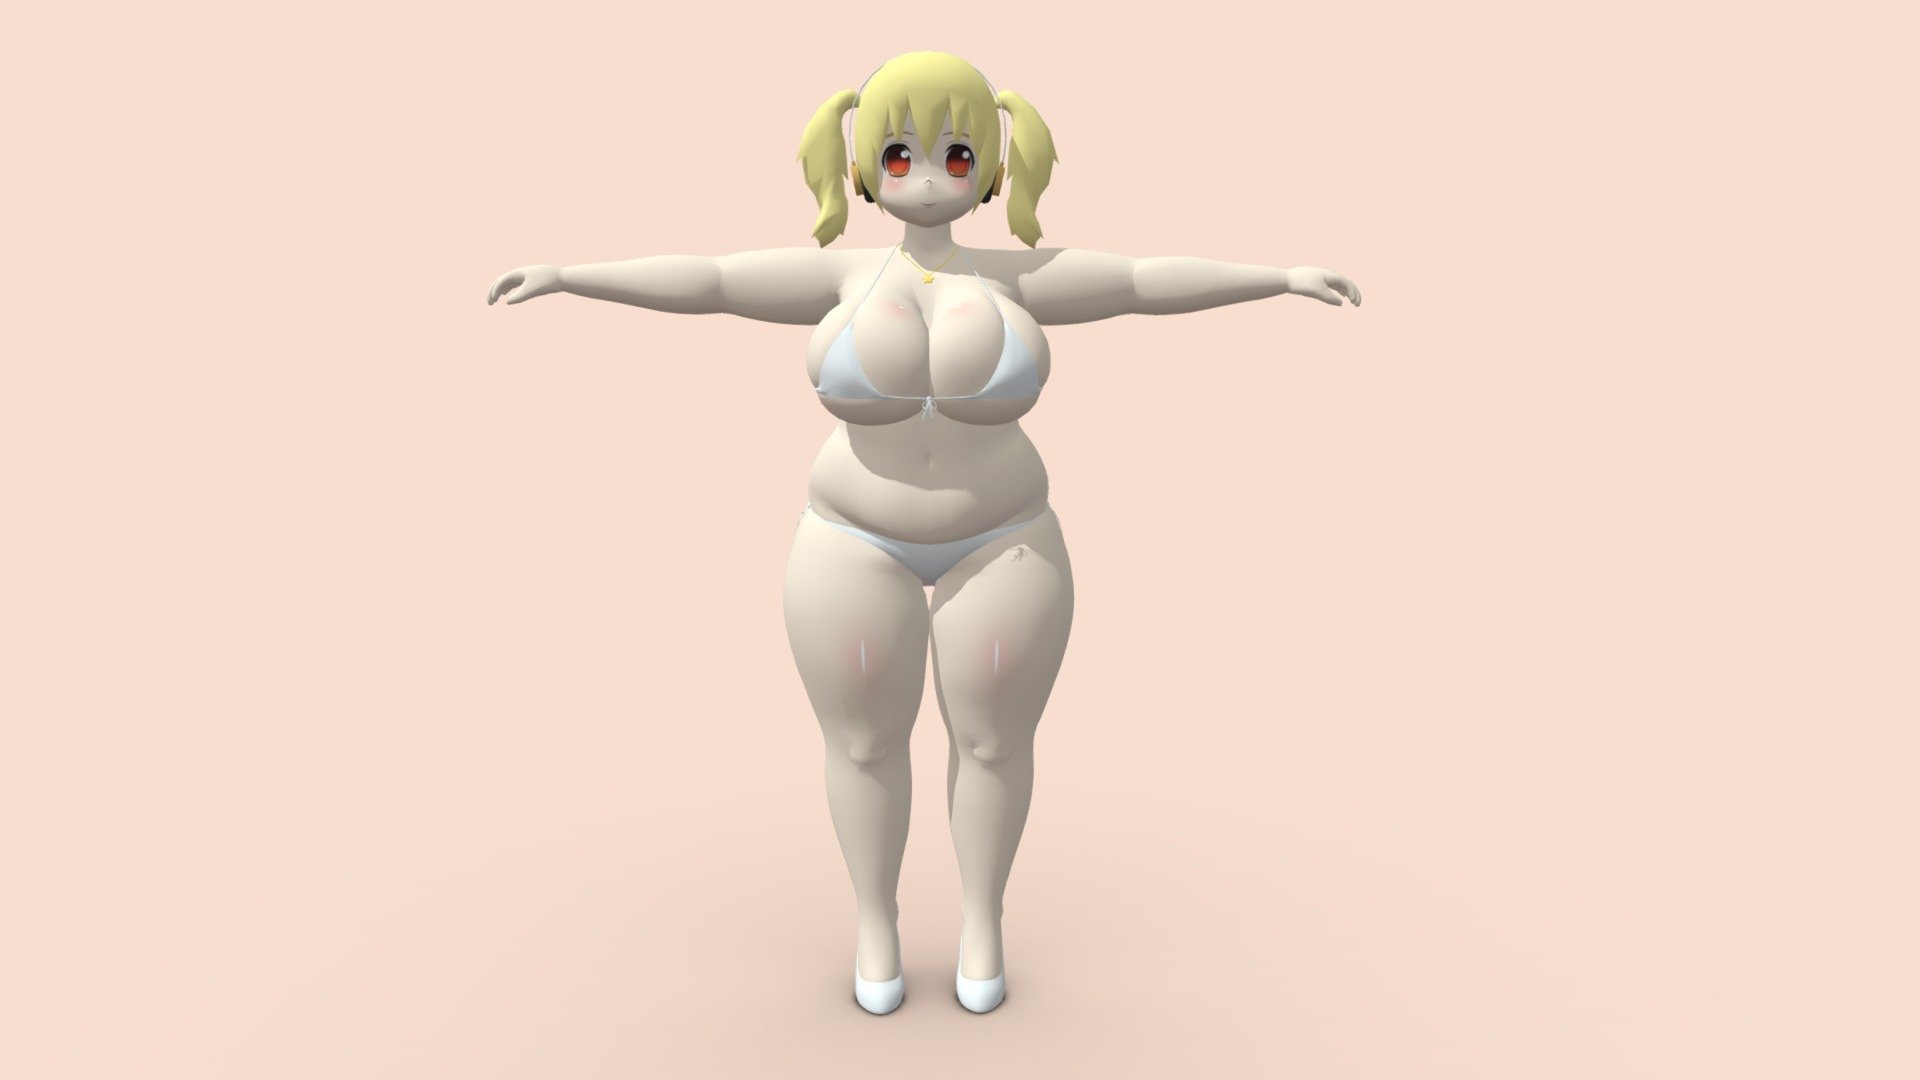 Super Pochaco in her uniform.

Also, if you play Cities: Skylines, you can download her from the workshop and have her as a citizen in your city: https://steamcommunity.com/sharedfiles/filedetails/?id=2886458136 - Super Pochaco Swimsuit - 3D model by Nosh59 3d model